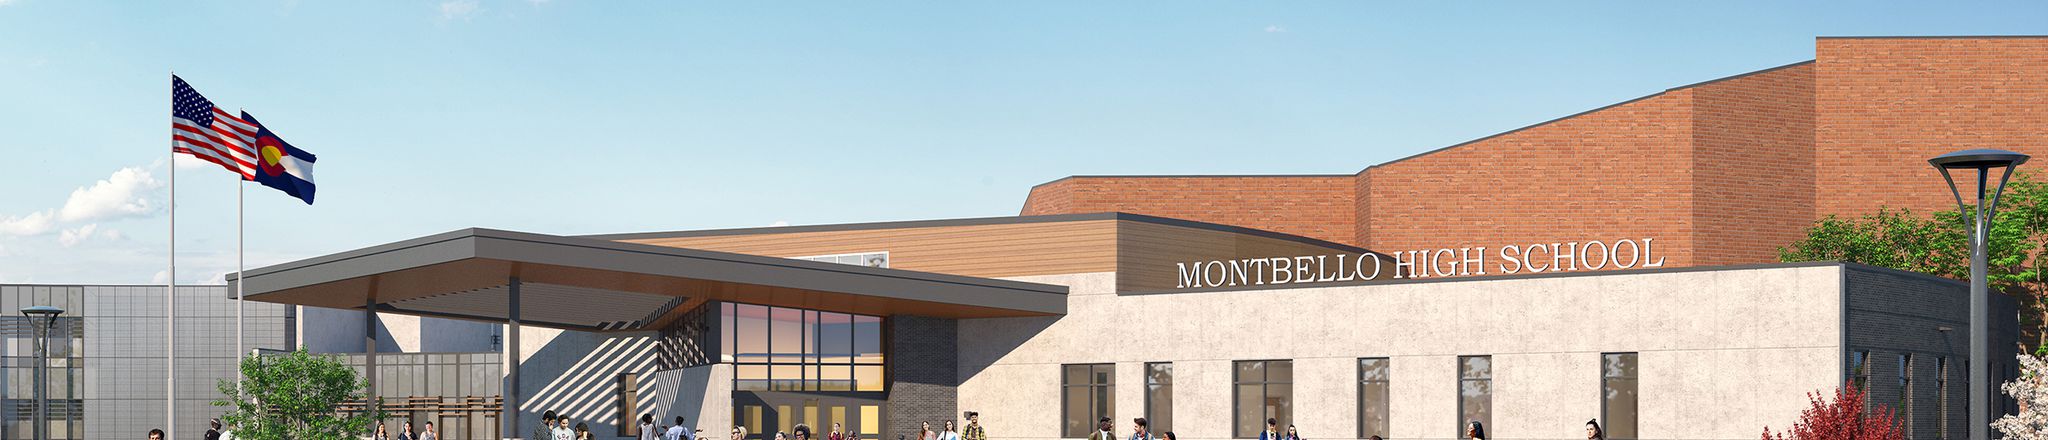 rendering of montbello high school entrance